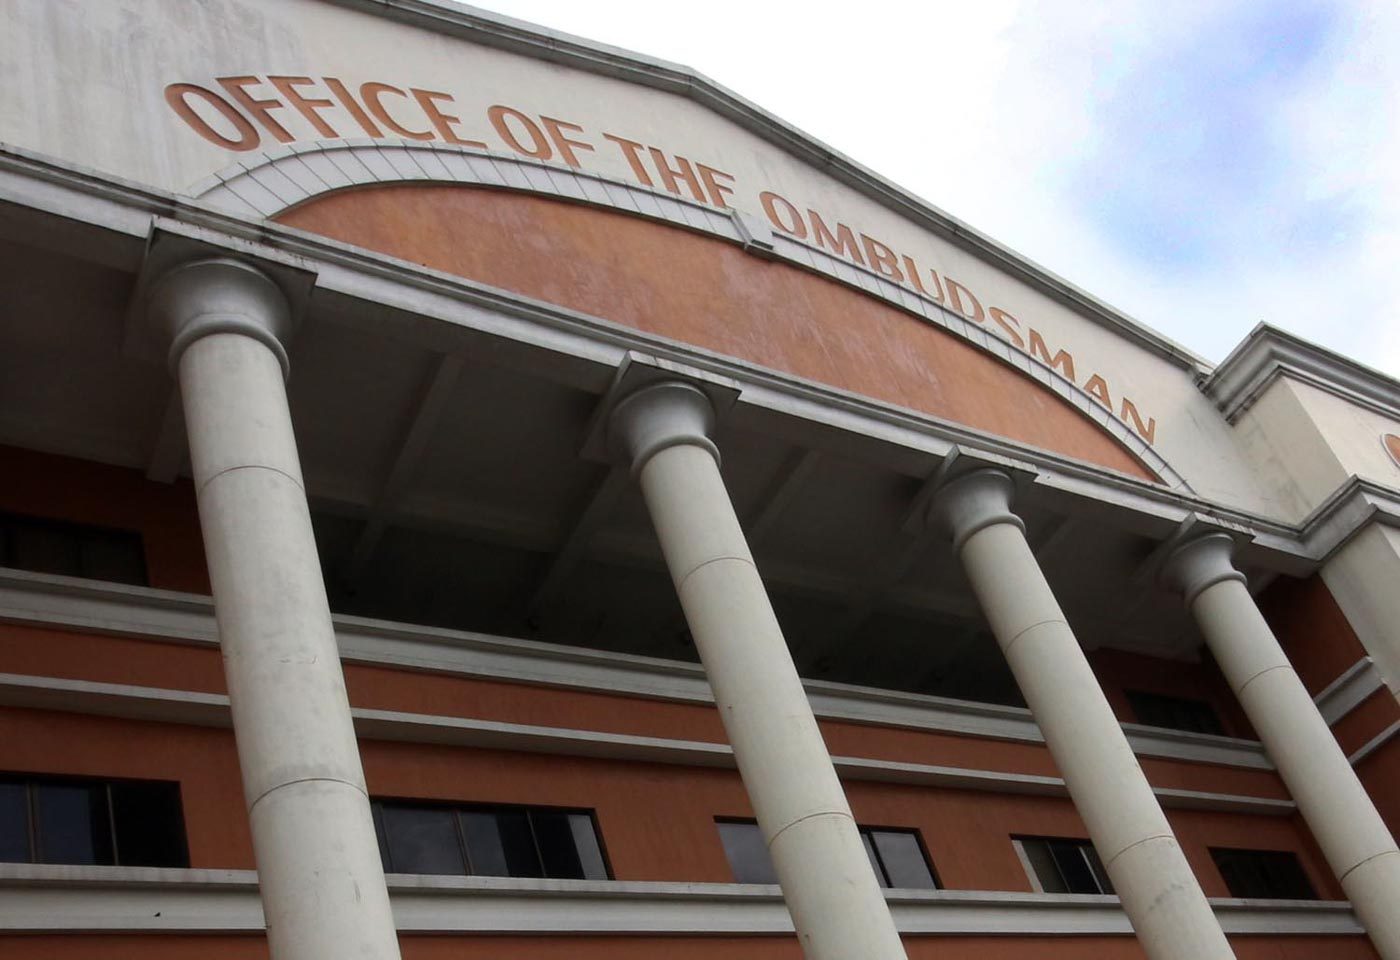 Panglao mayor suspended, faces graft charge for hiring losing candidates